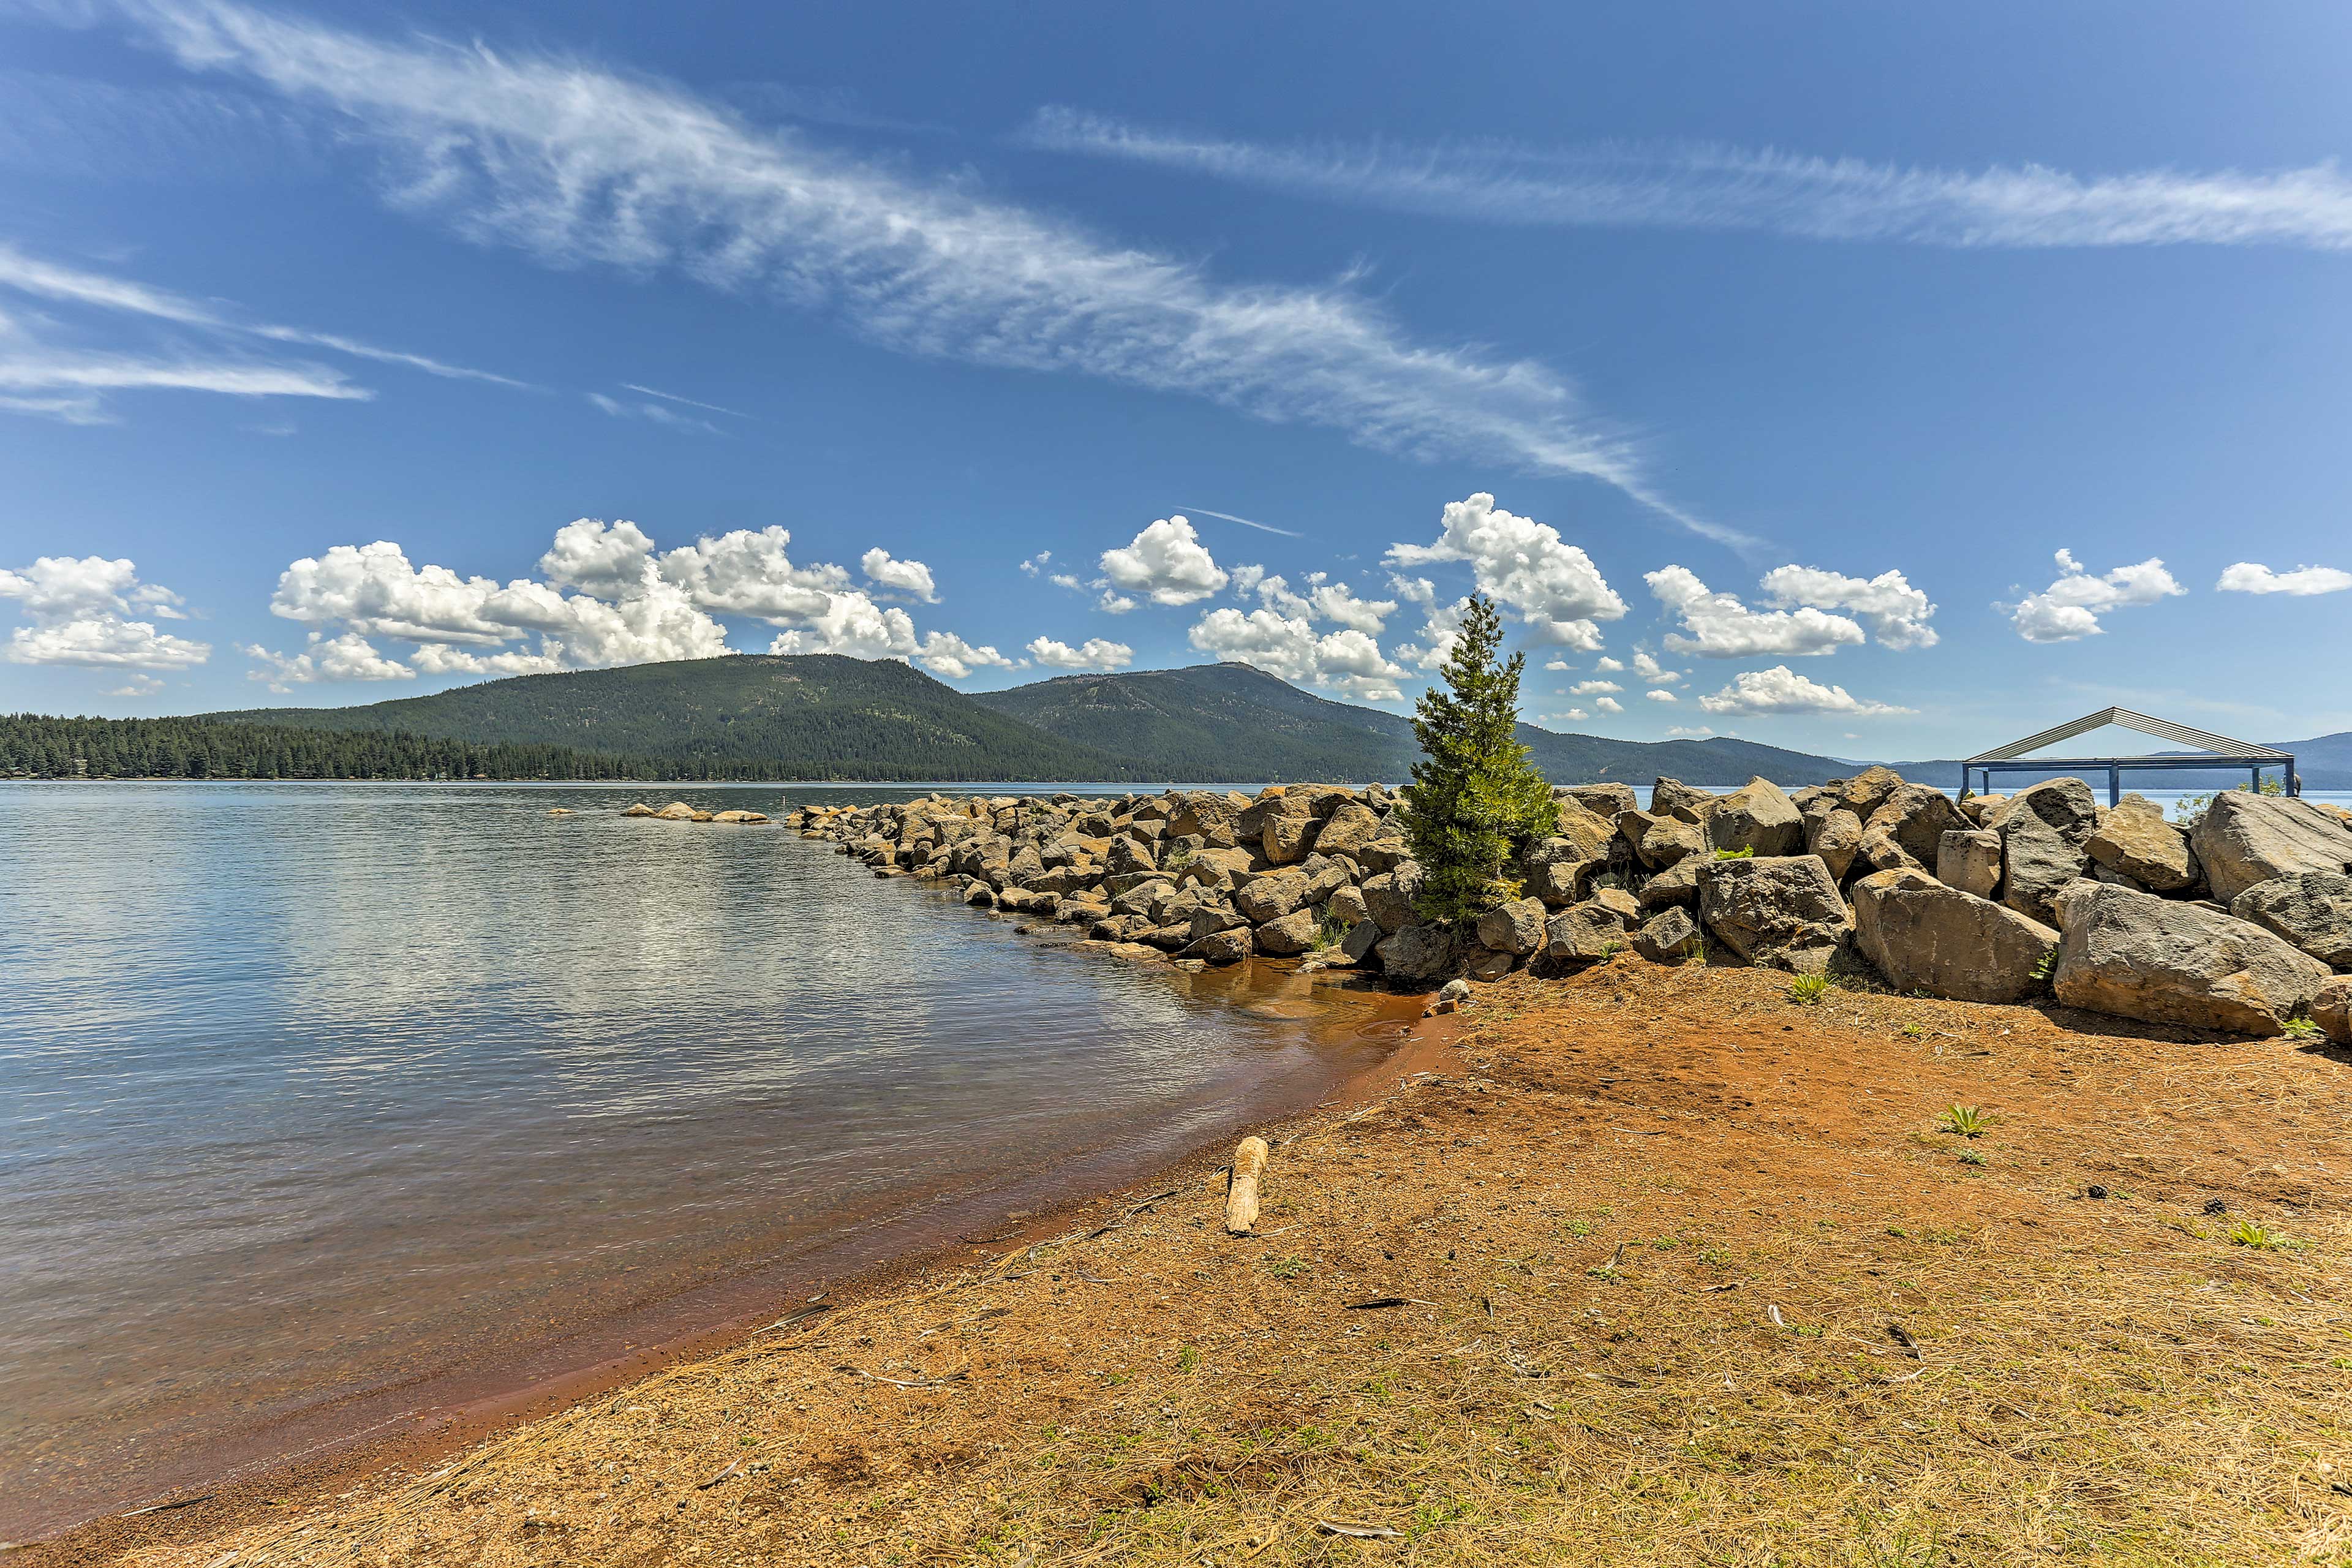 Lake Almanor is the best spot to enjoy water sports and relaxation!